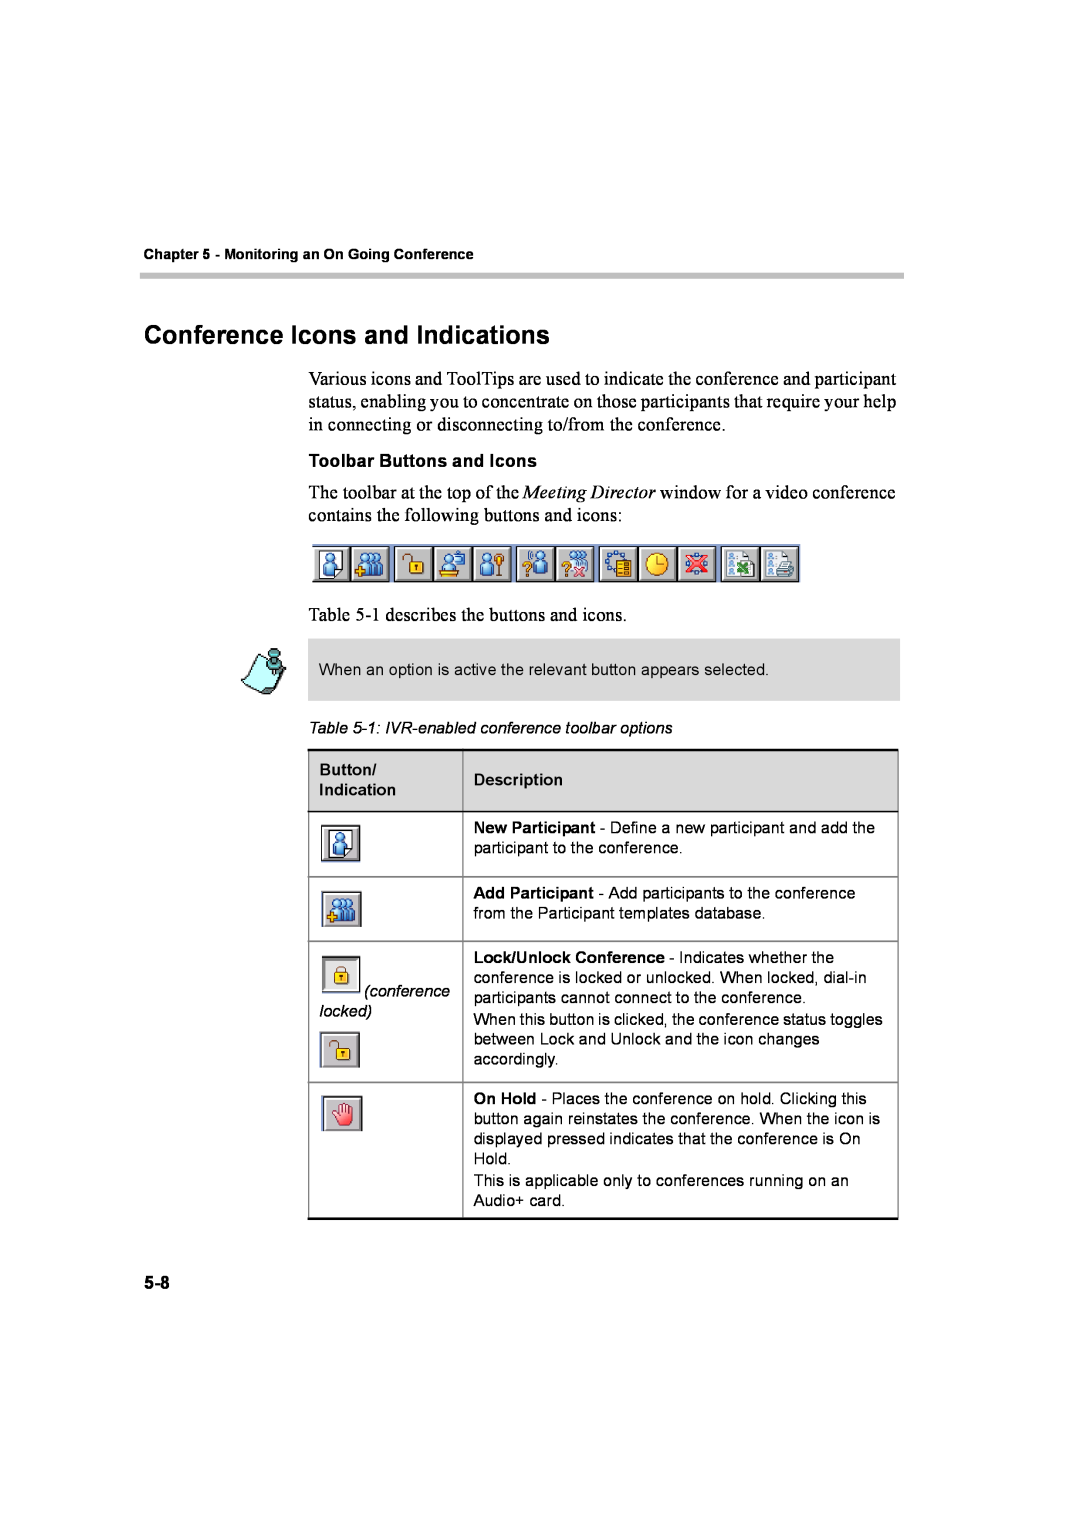 Polycom 8 manual Conference Icons and Indications 